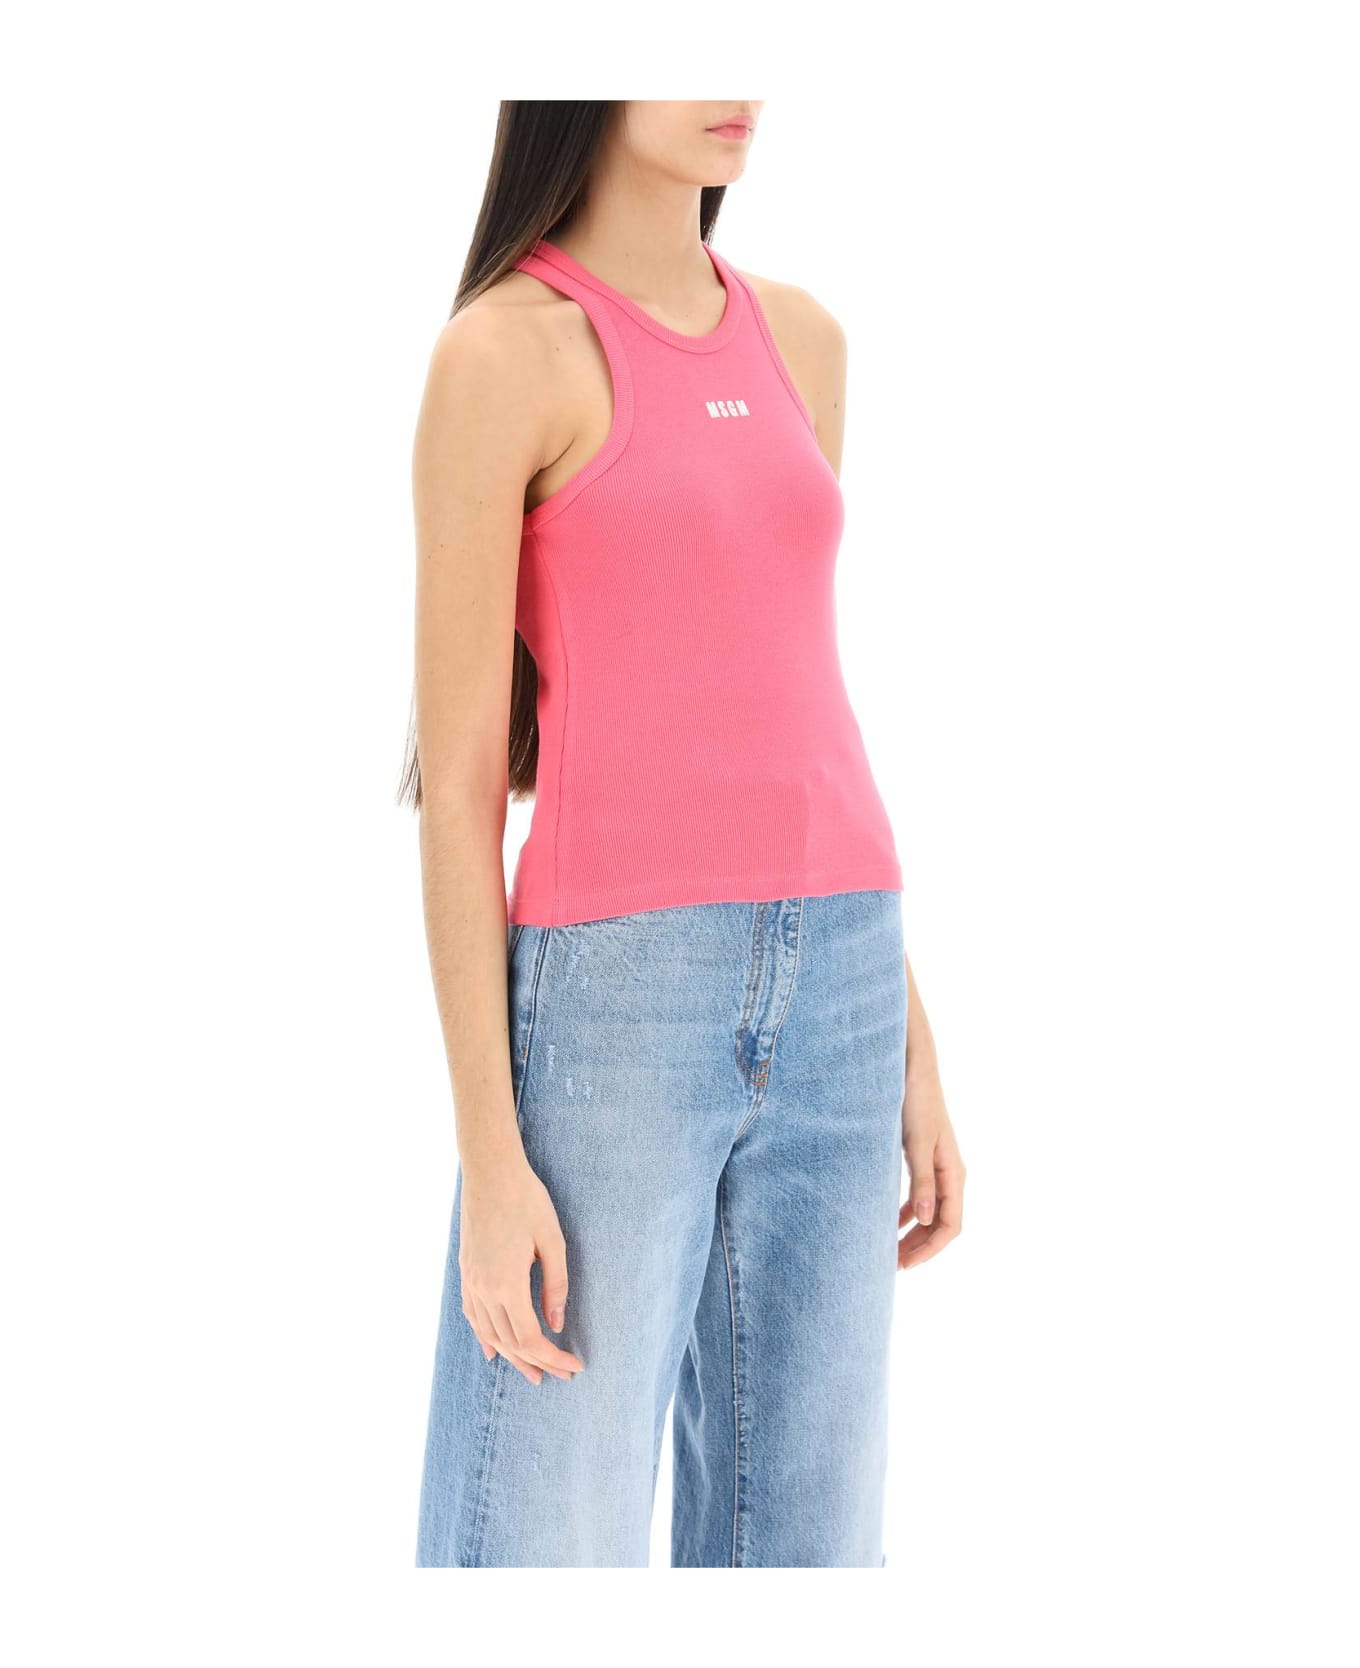 MSGM Logo Embroidery Tank Top - HOT PINK (Pink)